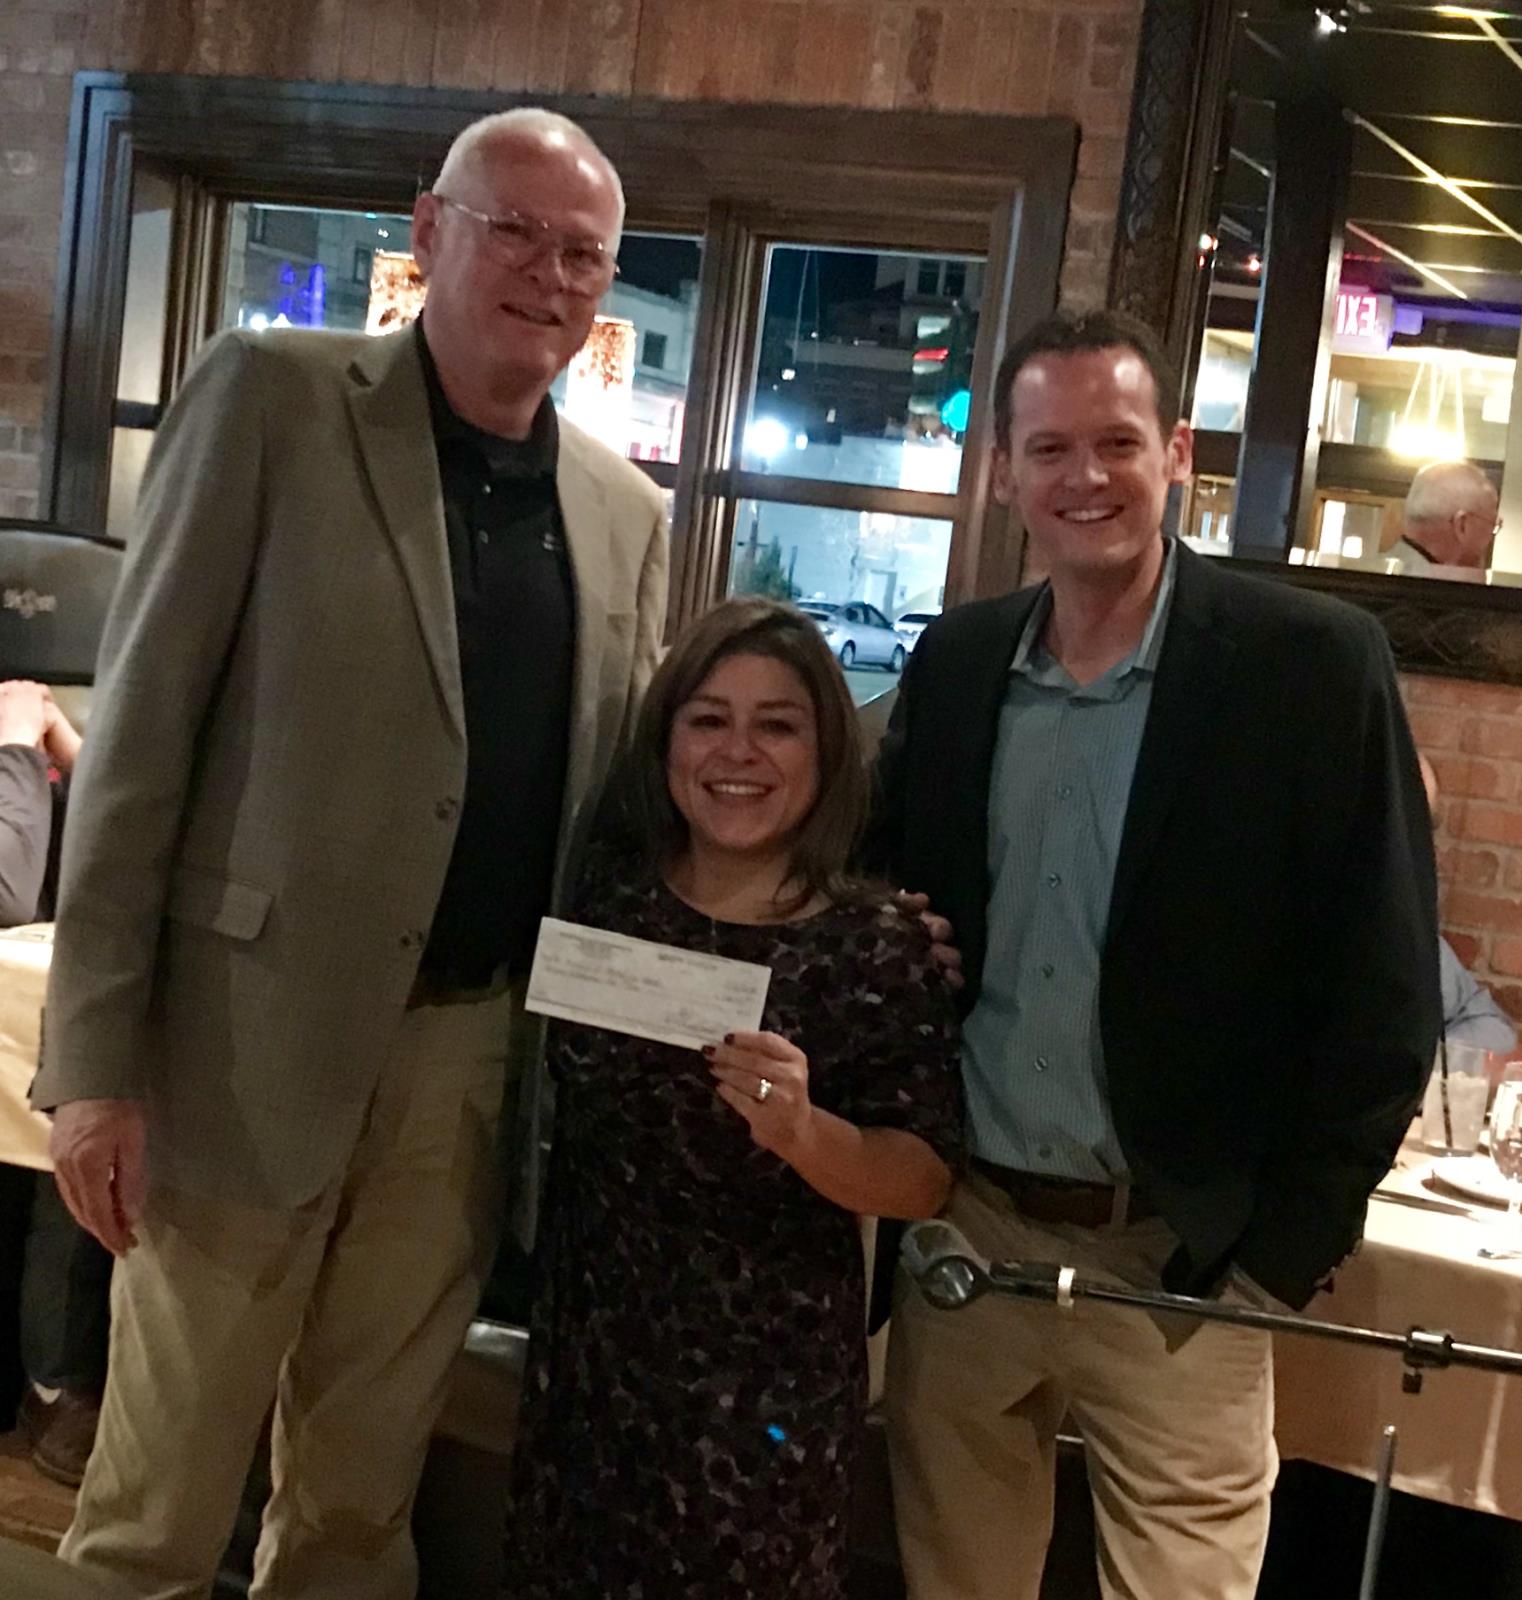 Community Council of Idaho Executive Director Irma Morin receives a check for $60,000 from Idaho Dairymen’s Association CEO Rick Naerebout, right, and IDA Governmental Affairs Director Bob Naerebout. The money will be used to support CCI’s newly formed immigration legal services program, Familias Unidas.